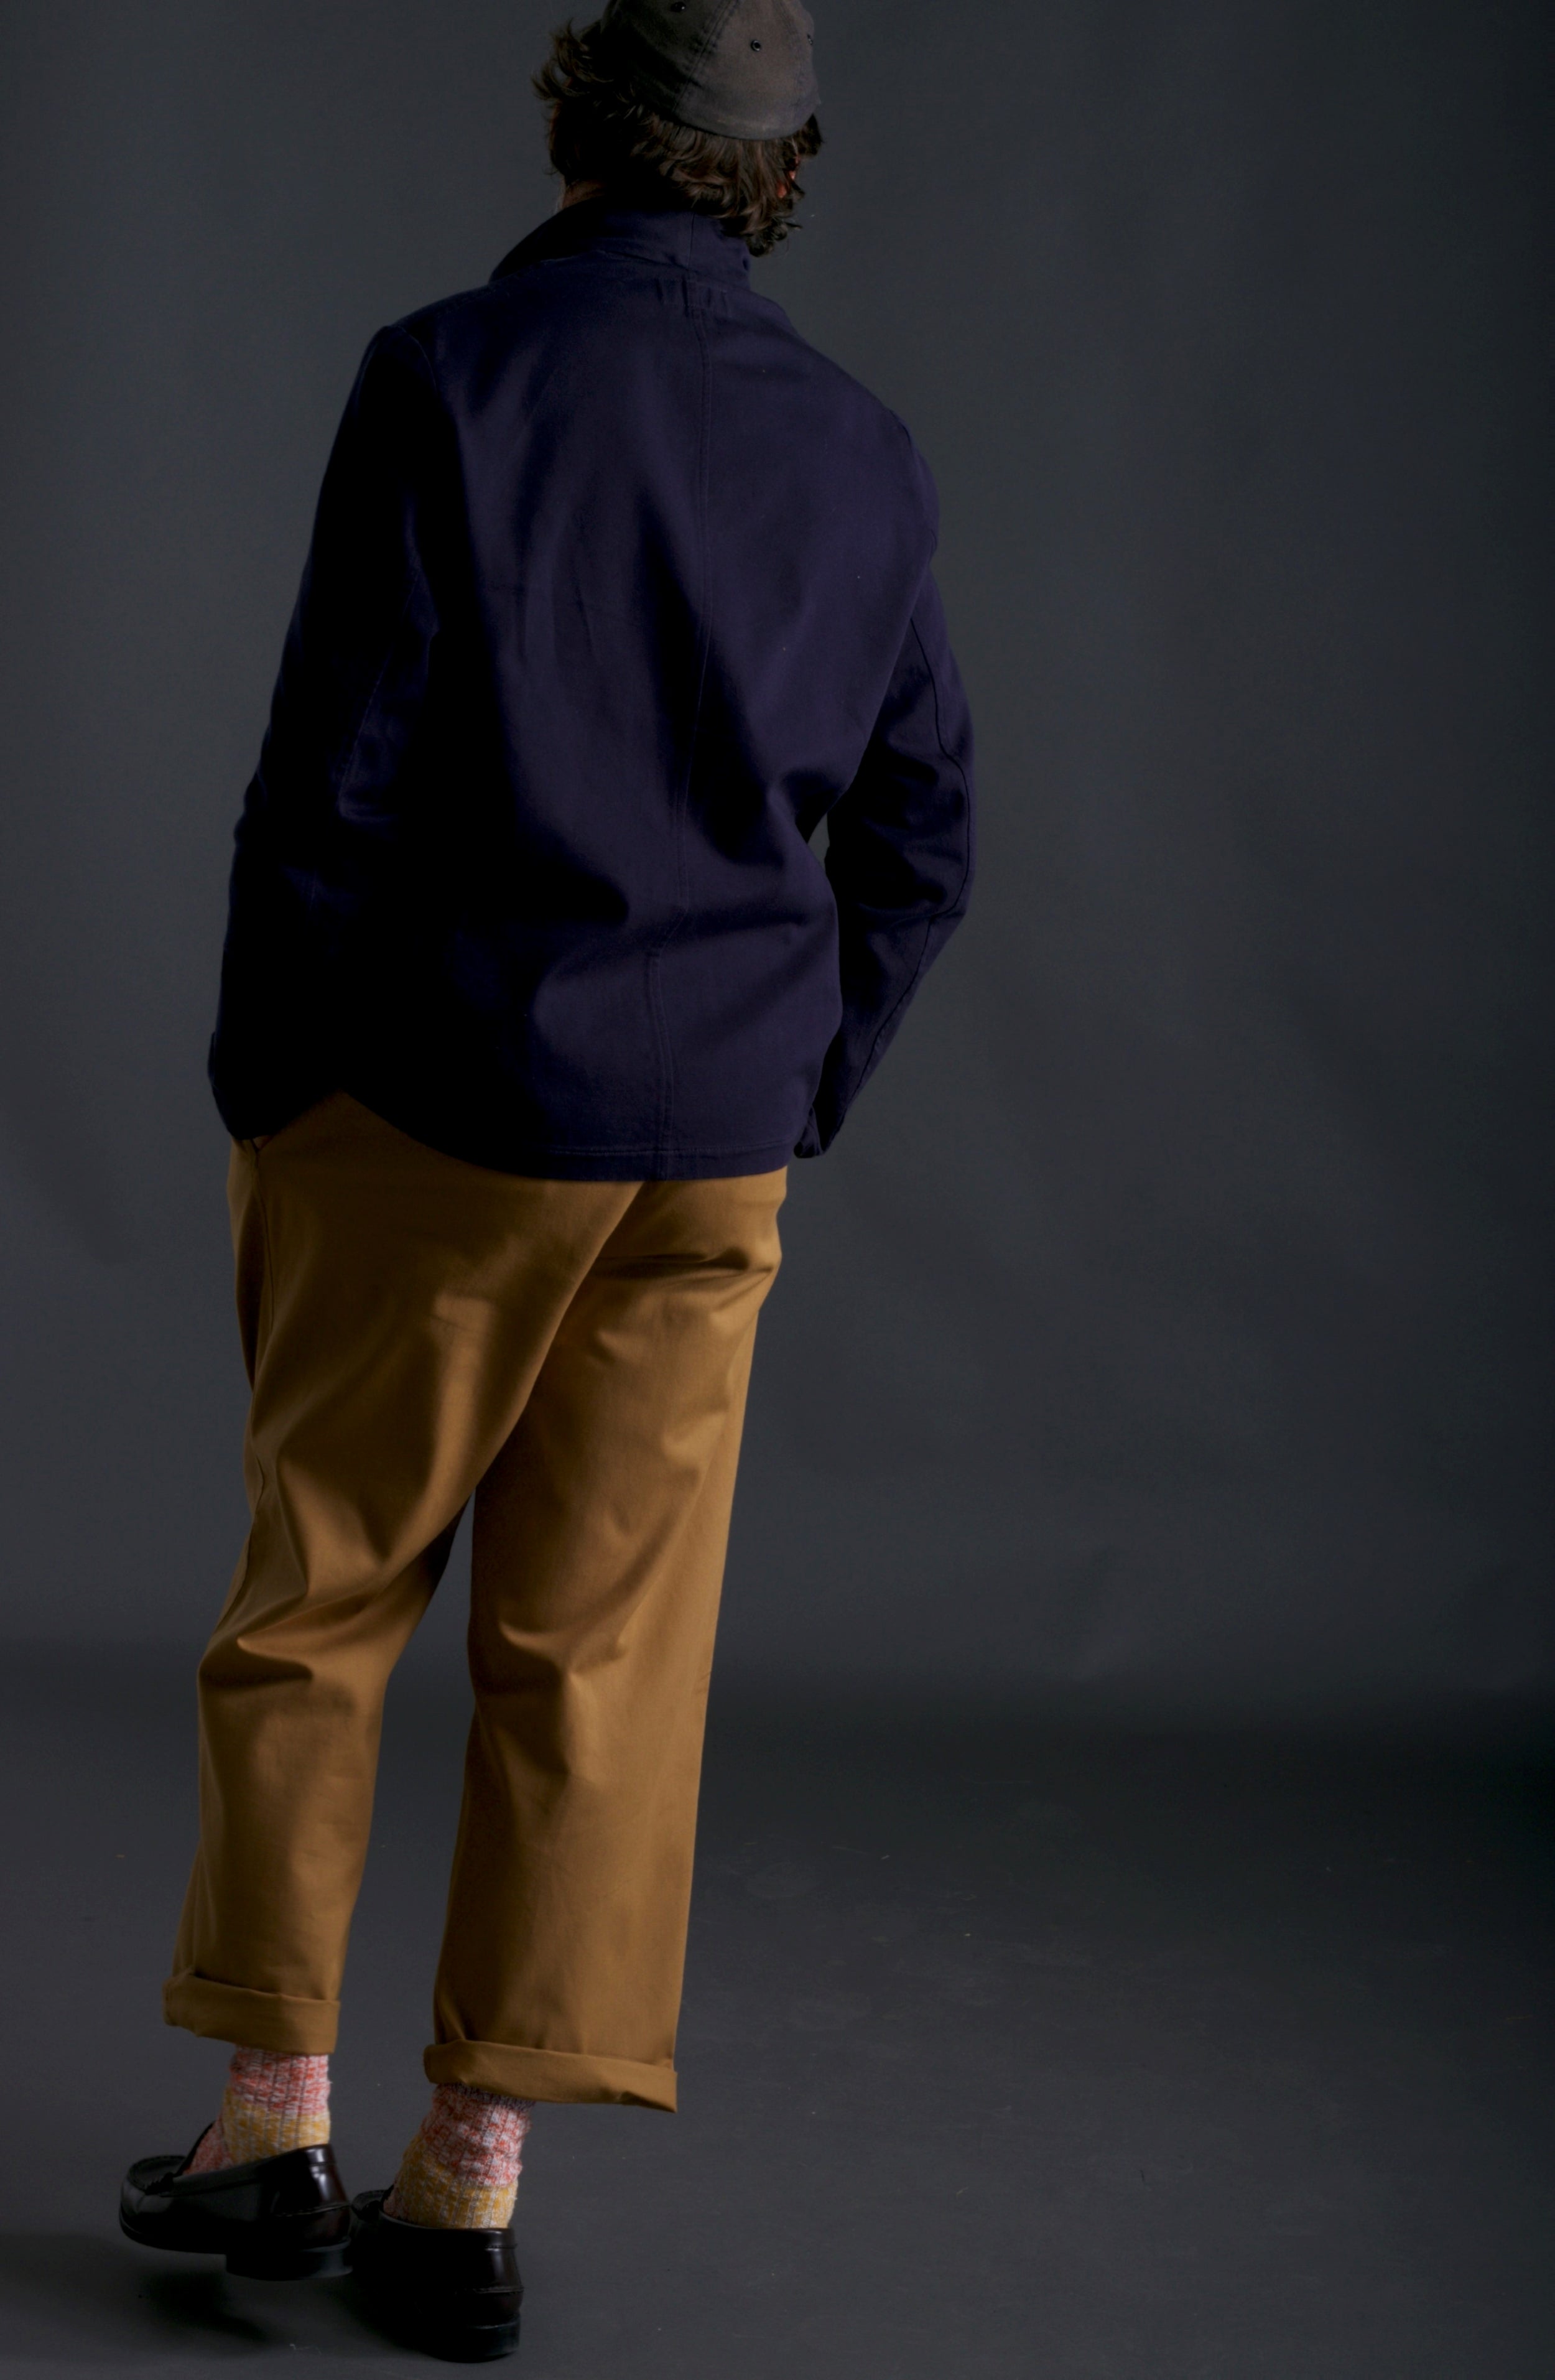 Man wears Carrier Company Classic Trouser in Tan, Three Button Jacket in Navy and Salmon Wool Walking Socks